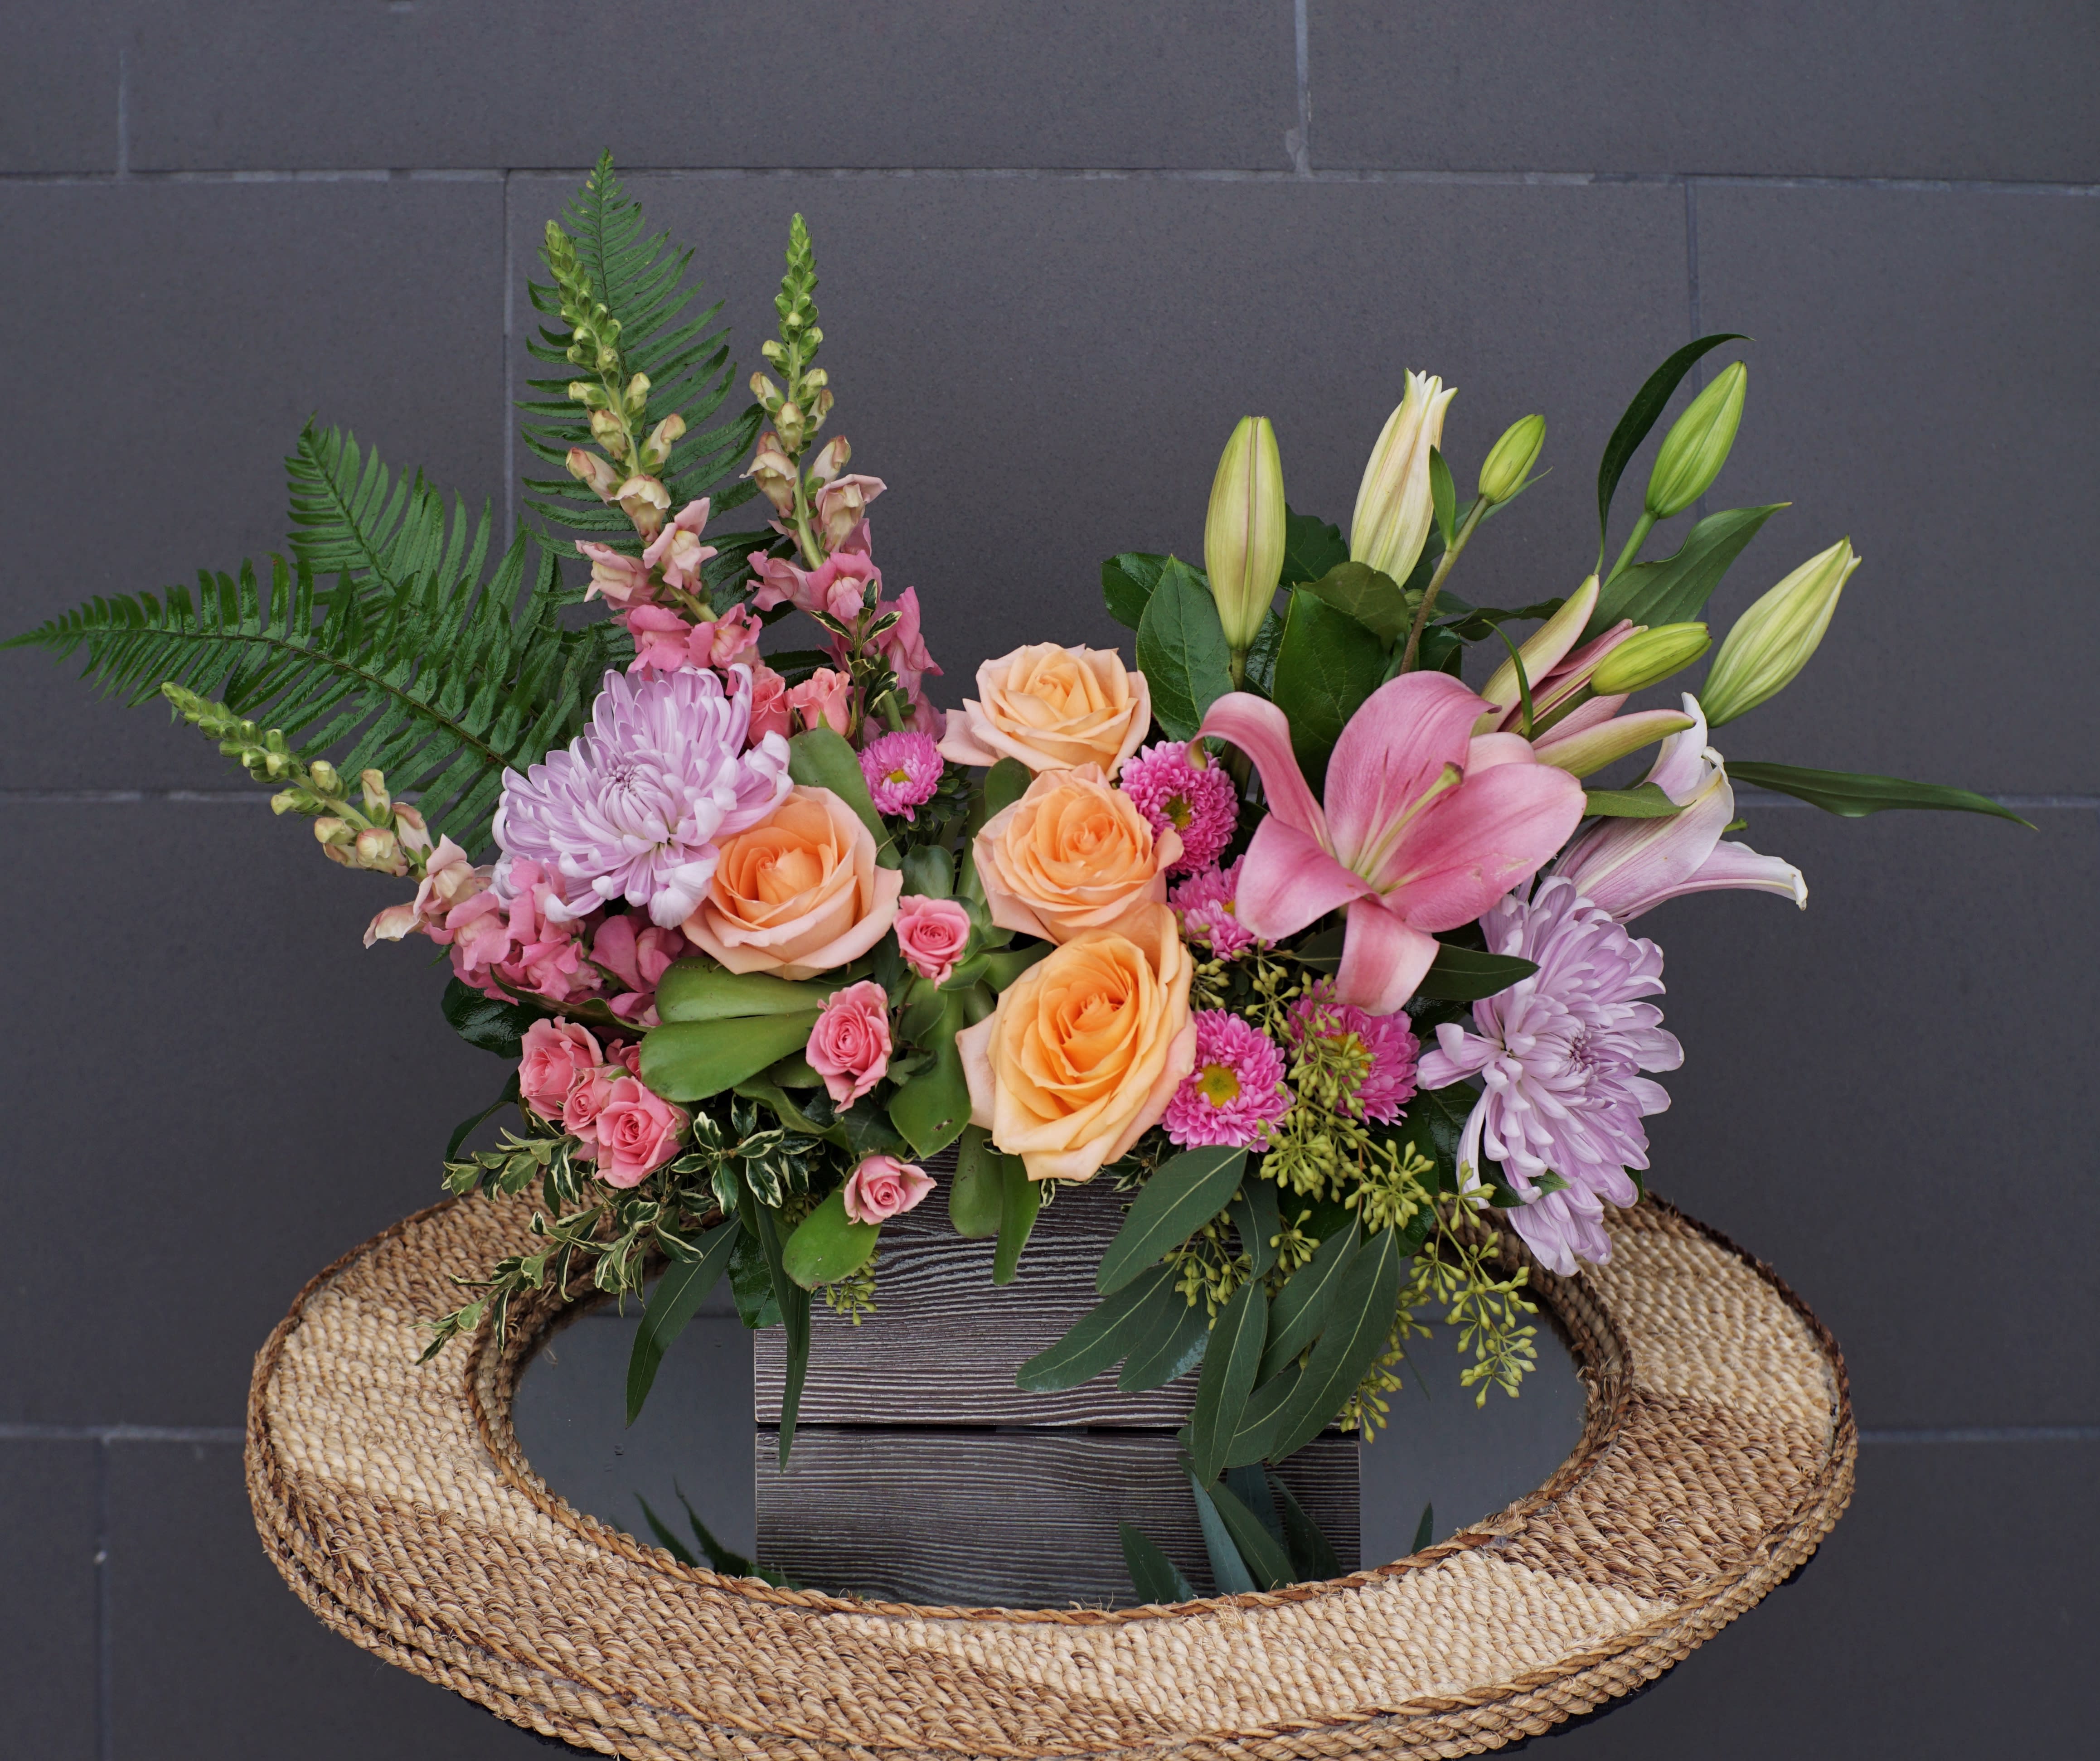 Sweetness - Soft and sweet pastel colors of lily, rose, snapdragon, succulent... and nice accents STANDARD: FIRST PHOTO DELUXE: SECOND PHOTO